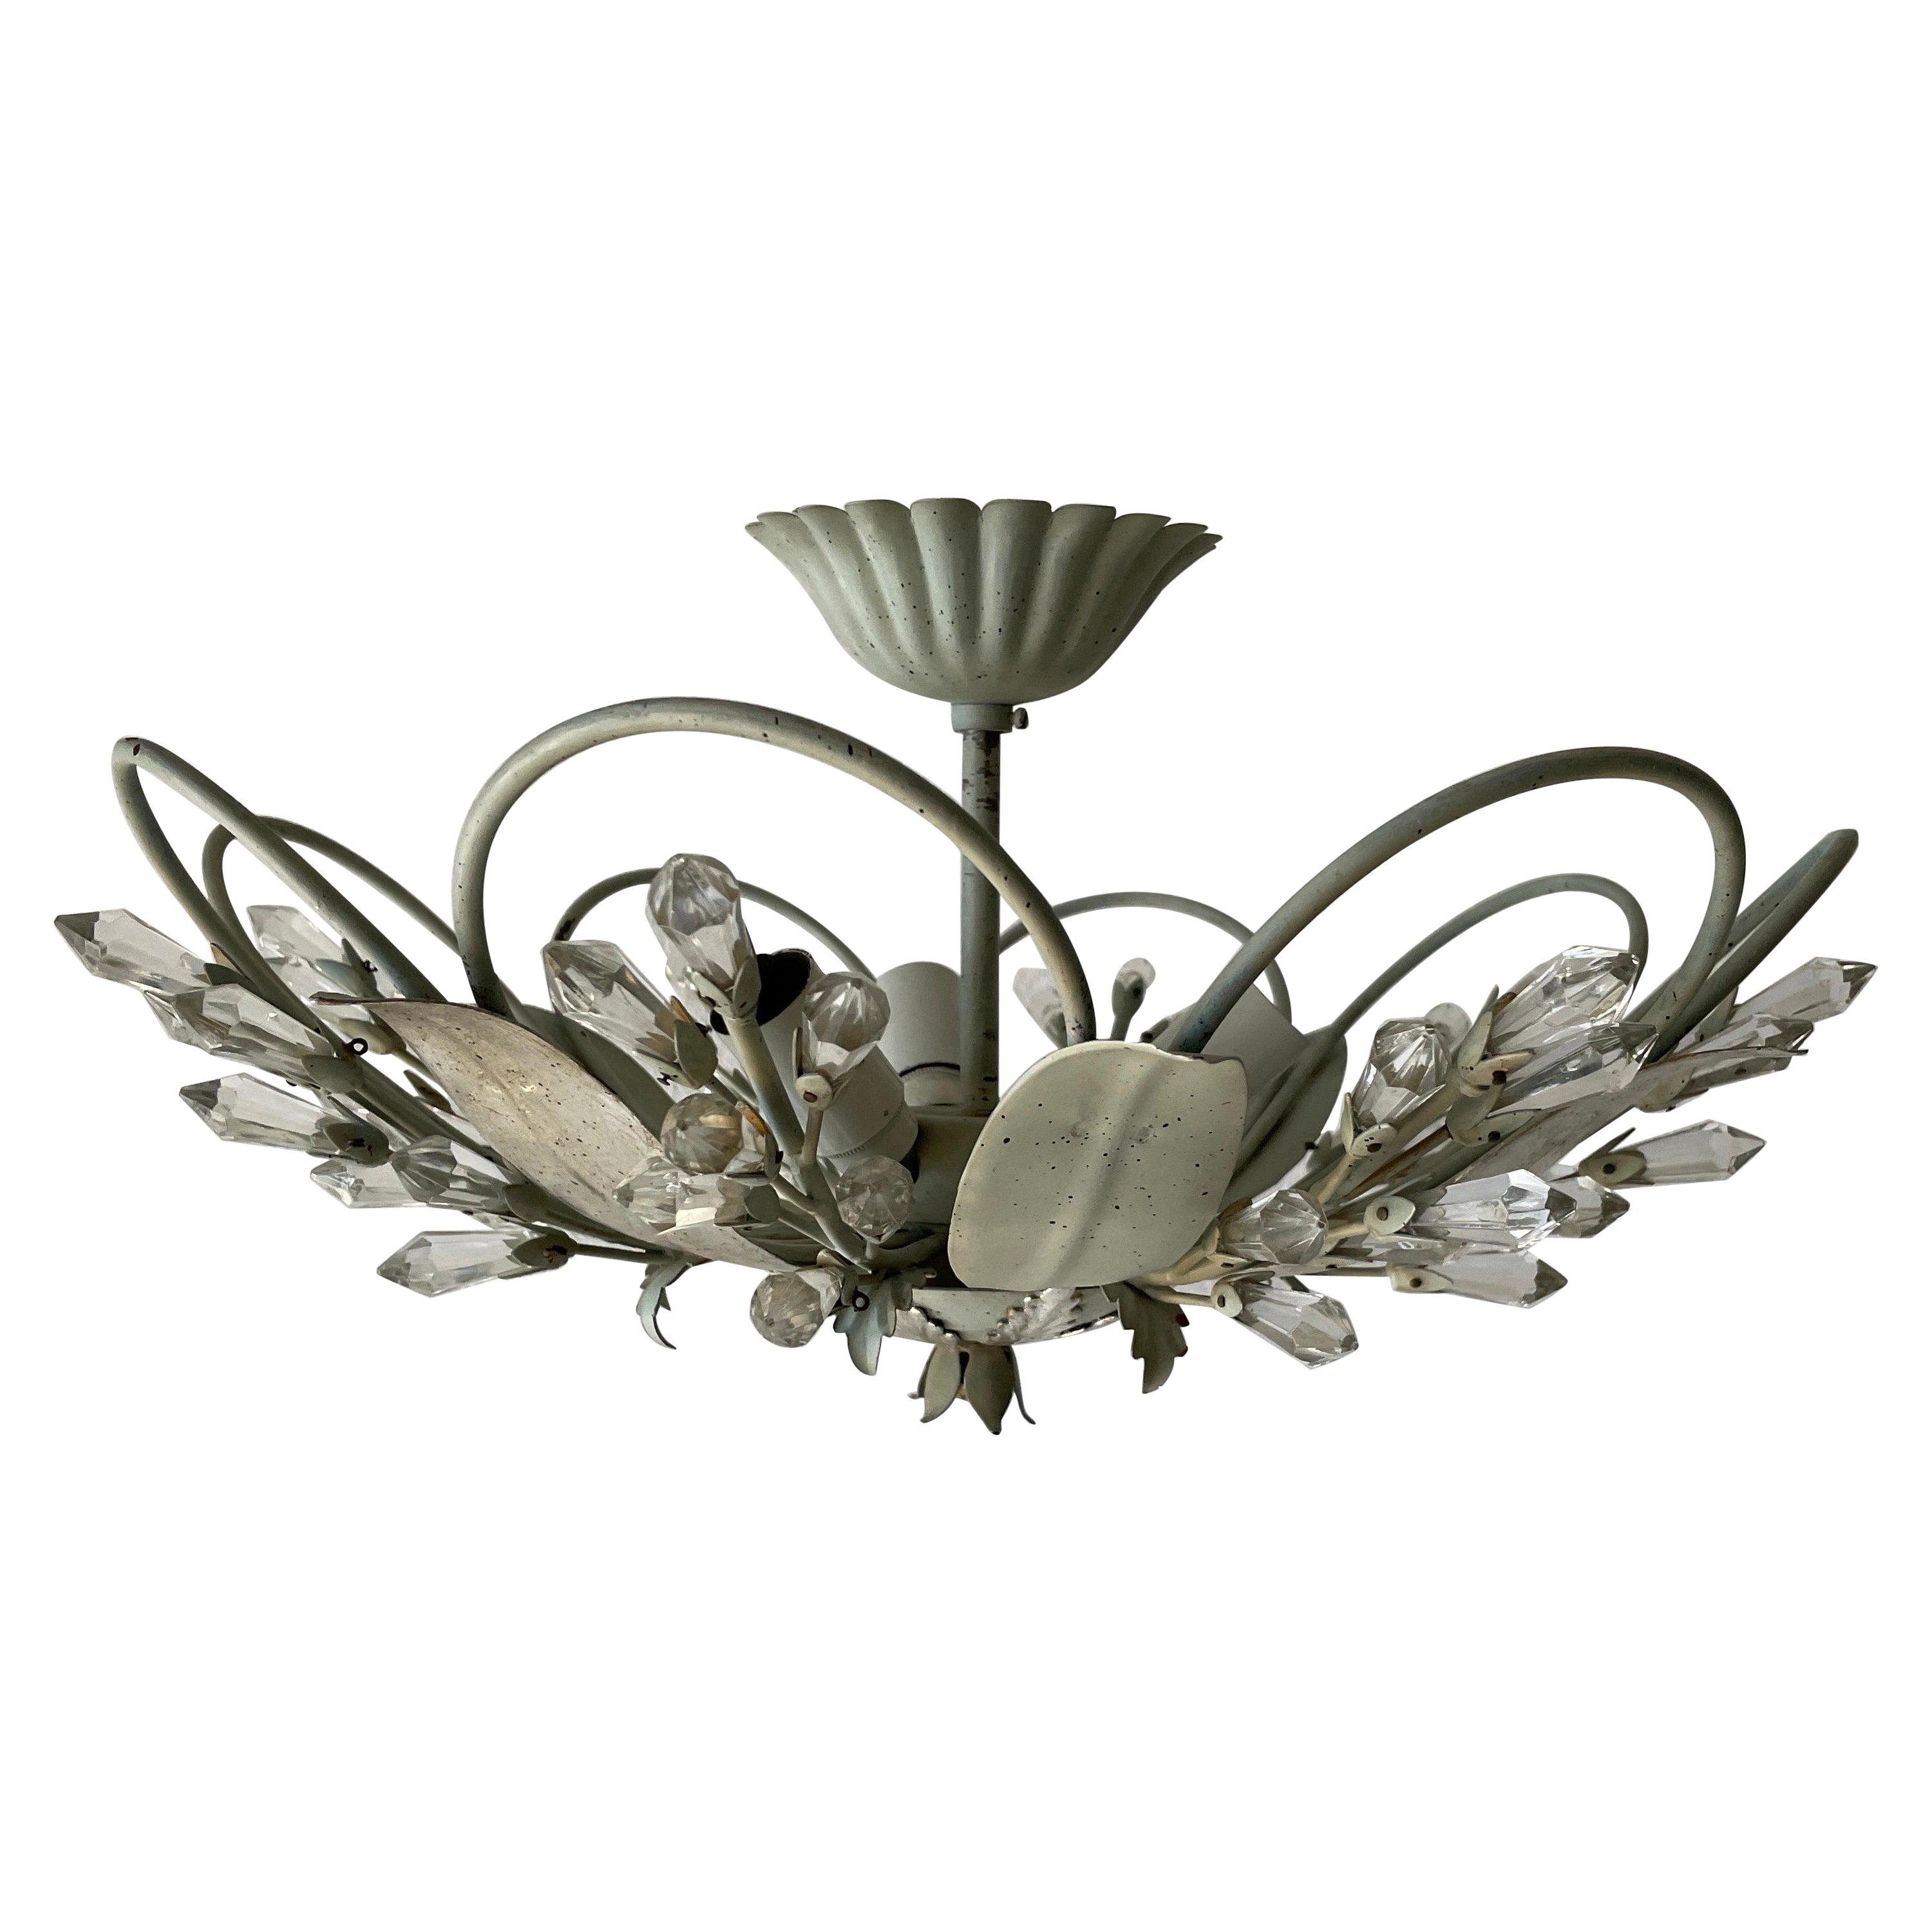 Flower Design Ceiling Lamp with Glass Ornaments, 1950s, Germany For Sale